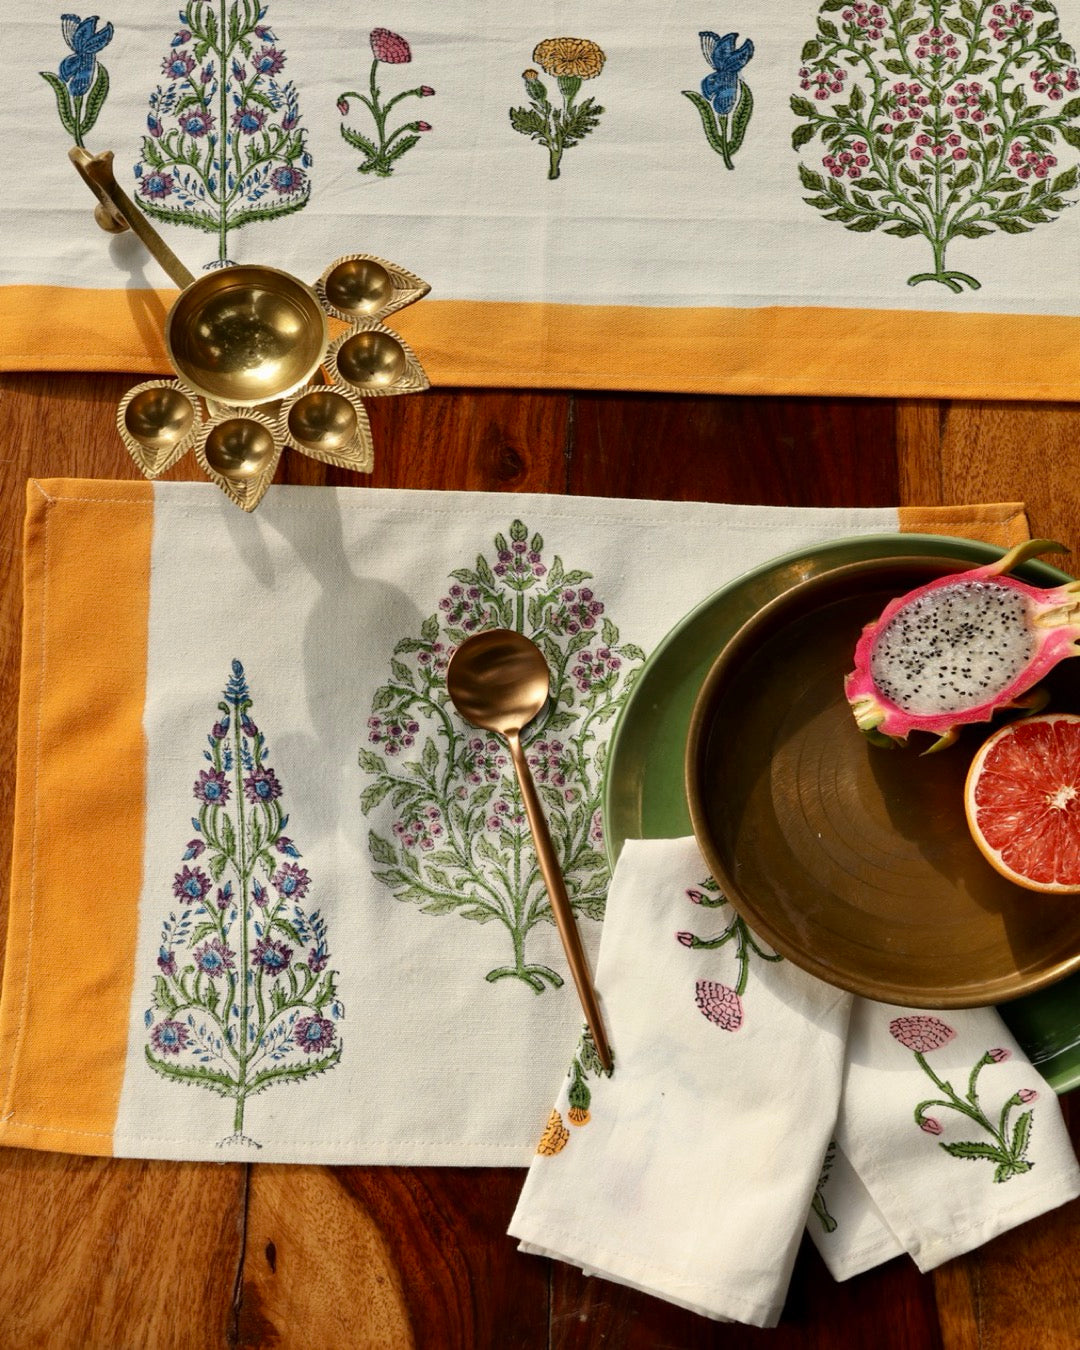 Gul Placemats and Napkins